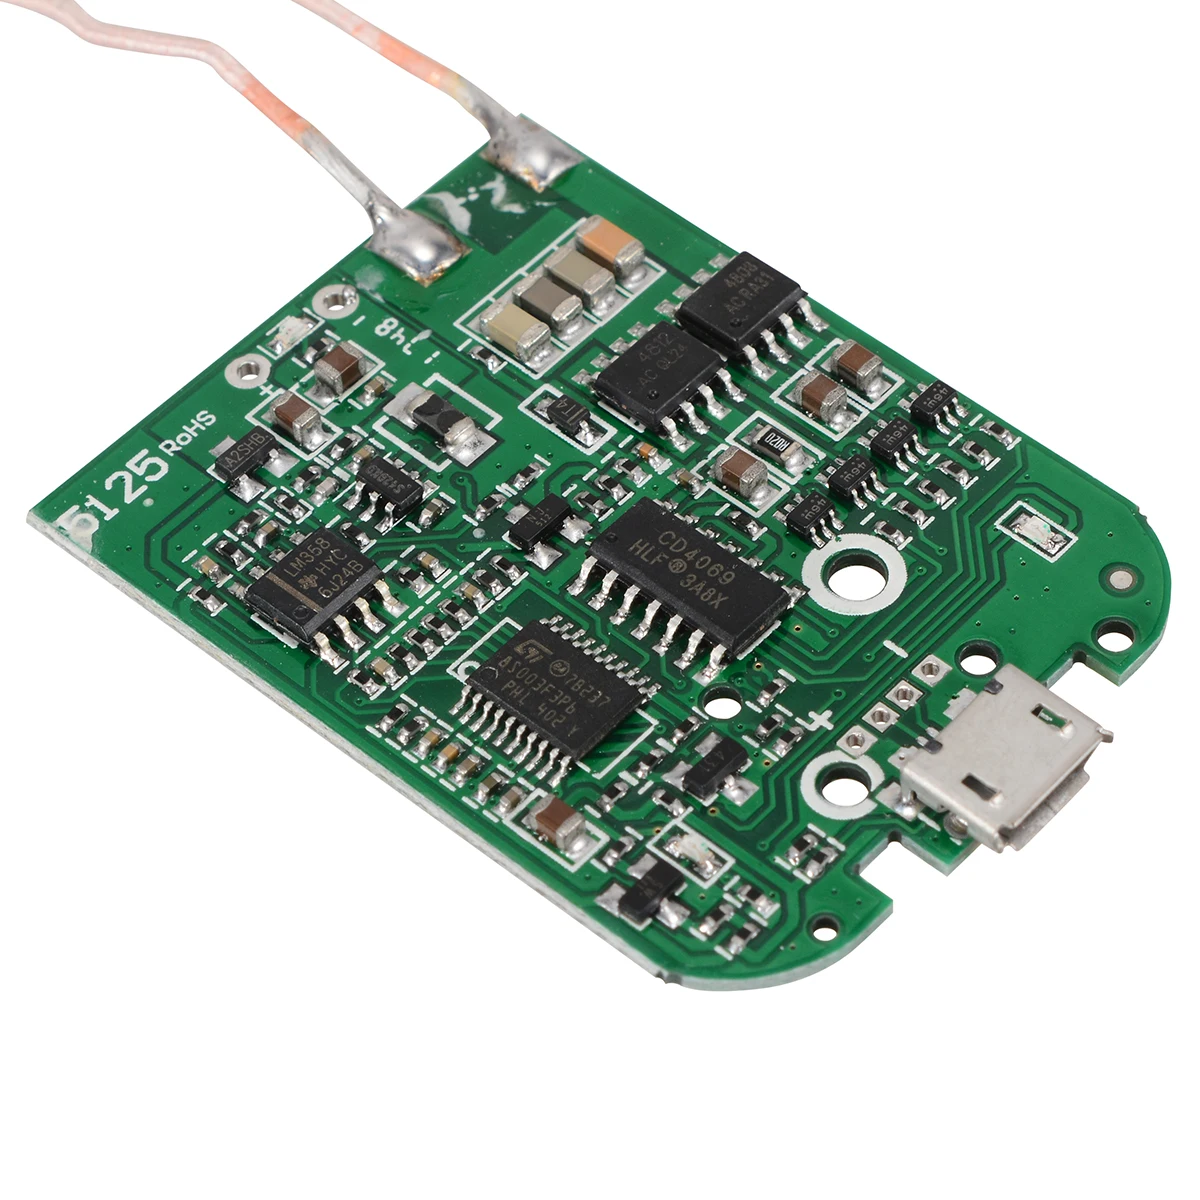 New Qi Fast Wireless Charger PCBA Circuit Board Transmitter Module + Coil Charging Qi Wireless Charging Standard